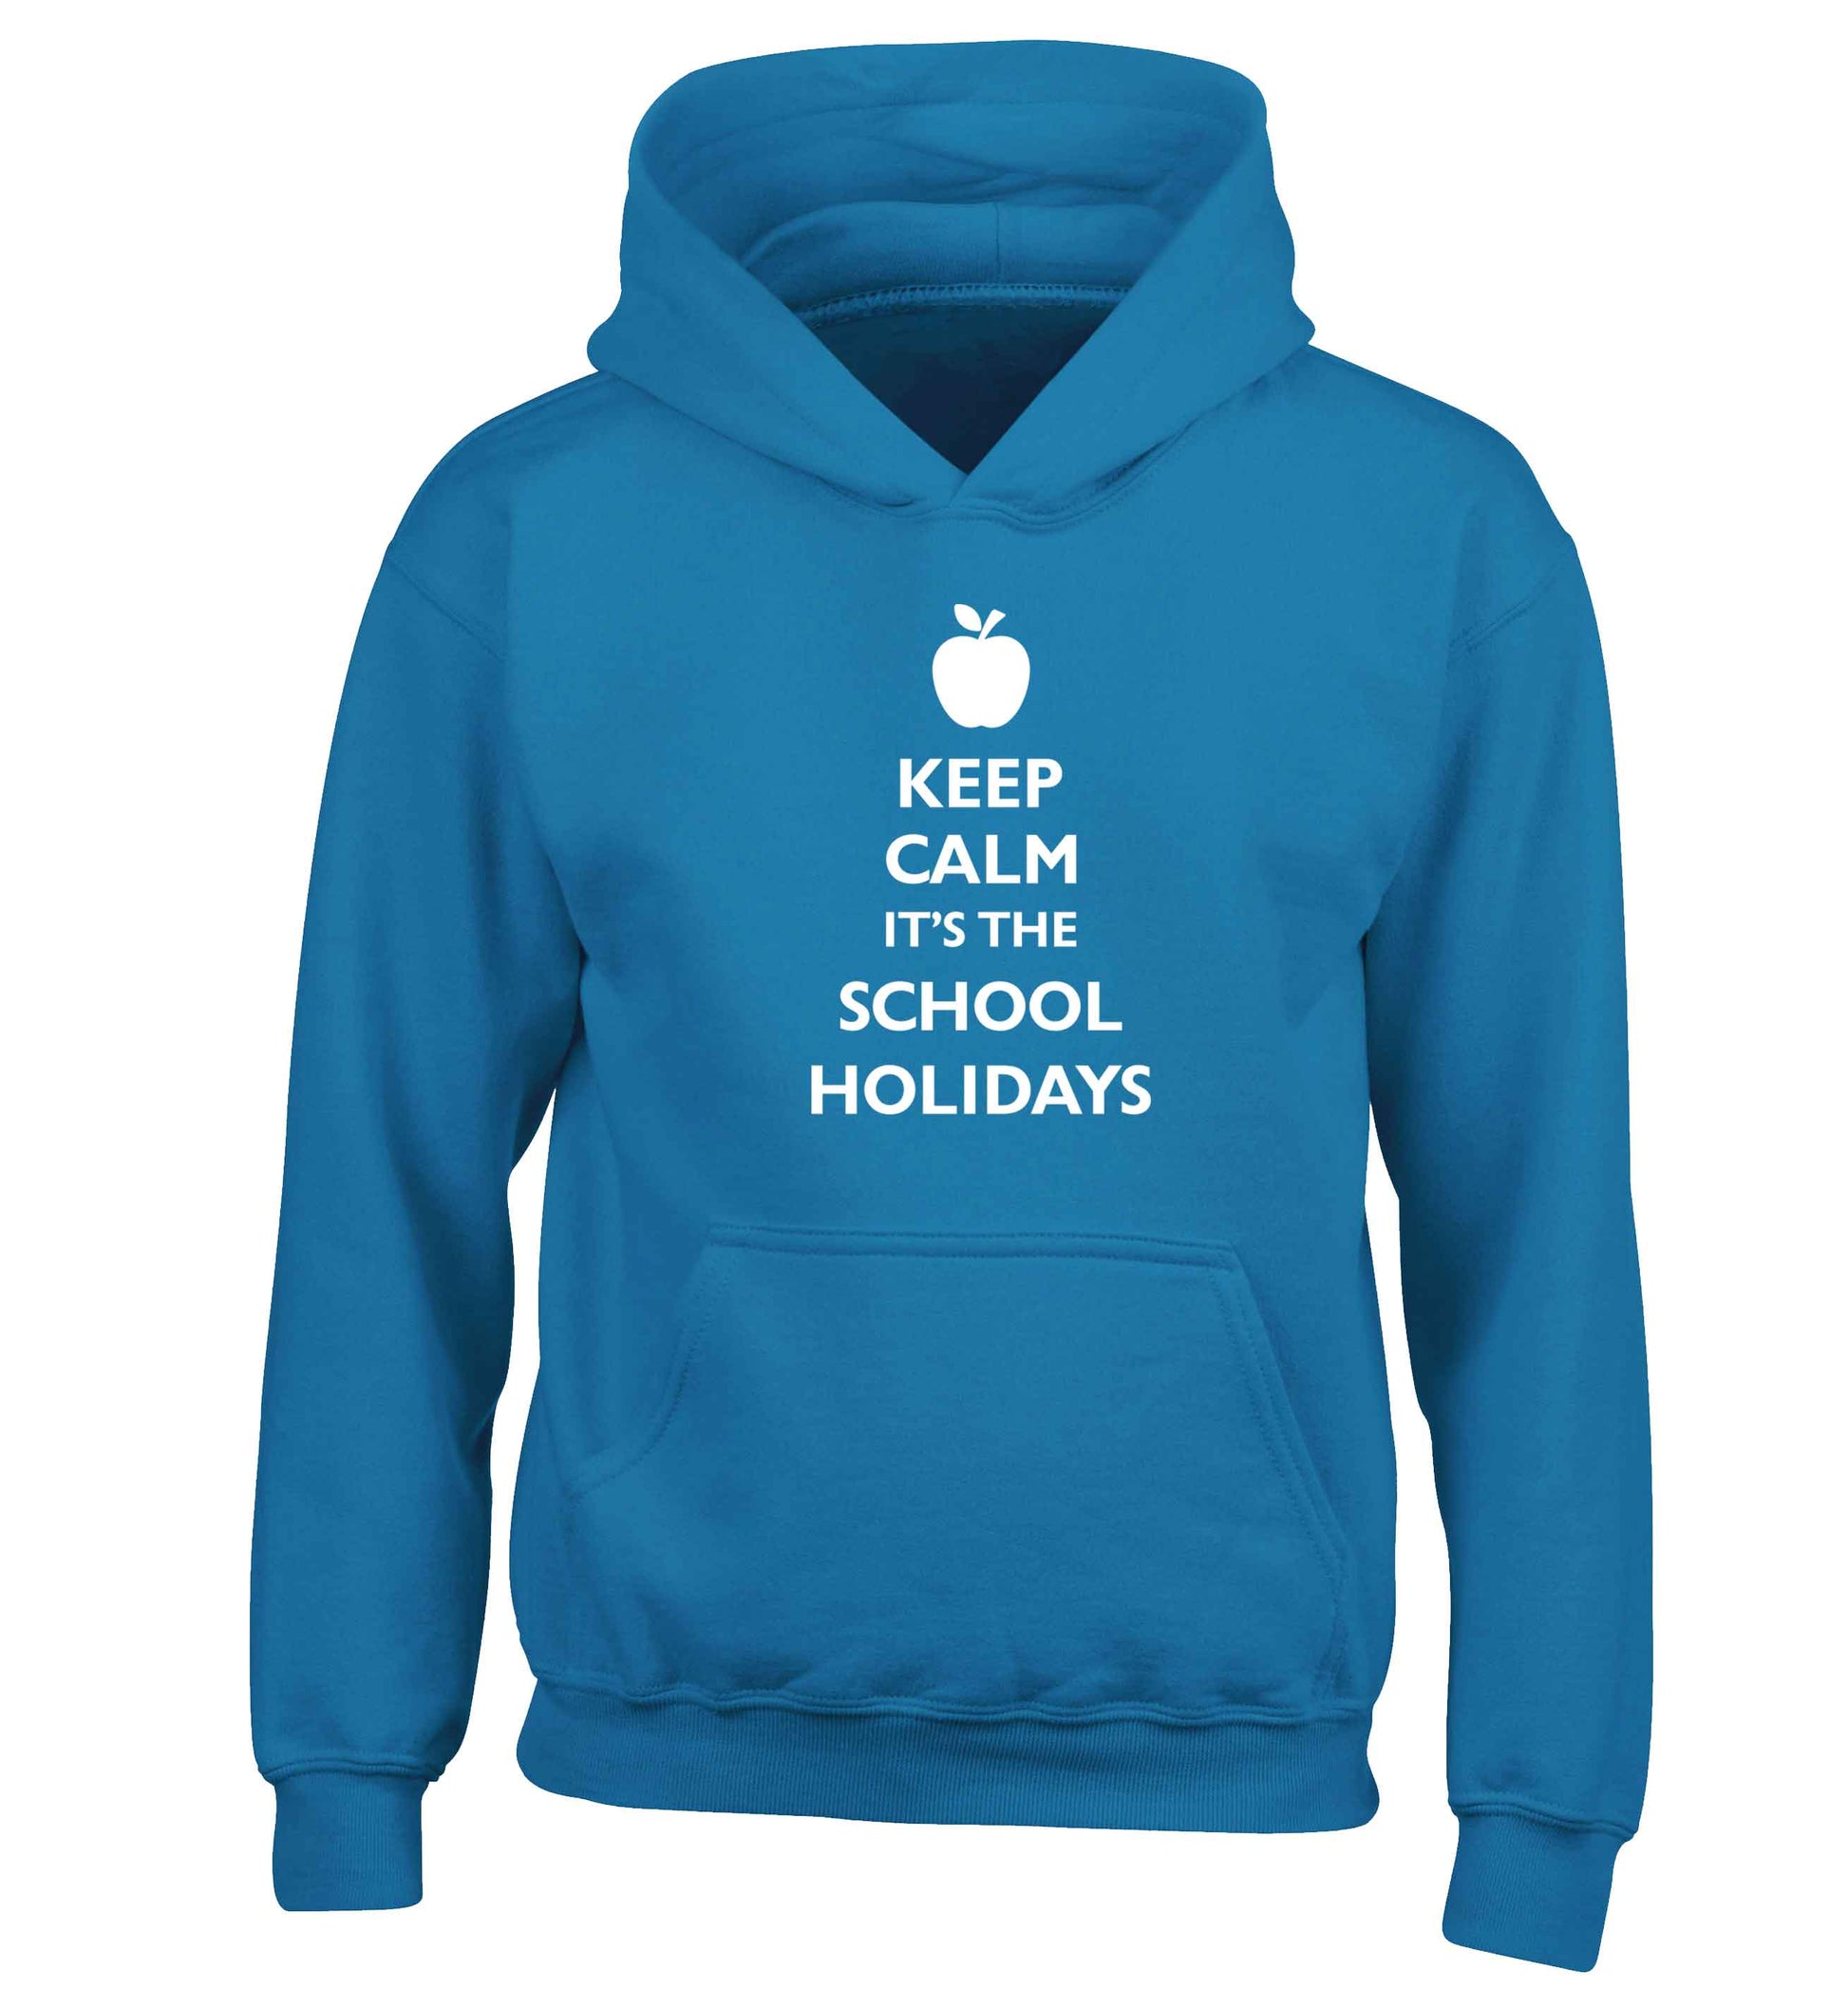 Keep calm it's the school holidays children's blue hoodie 12-13 Years